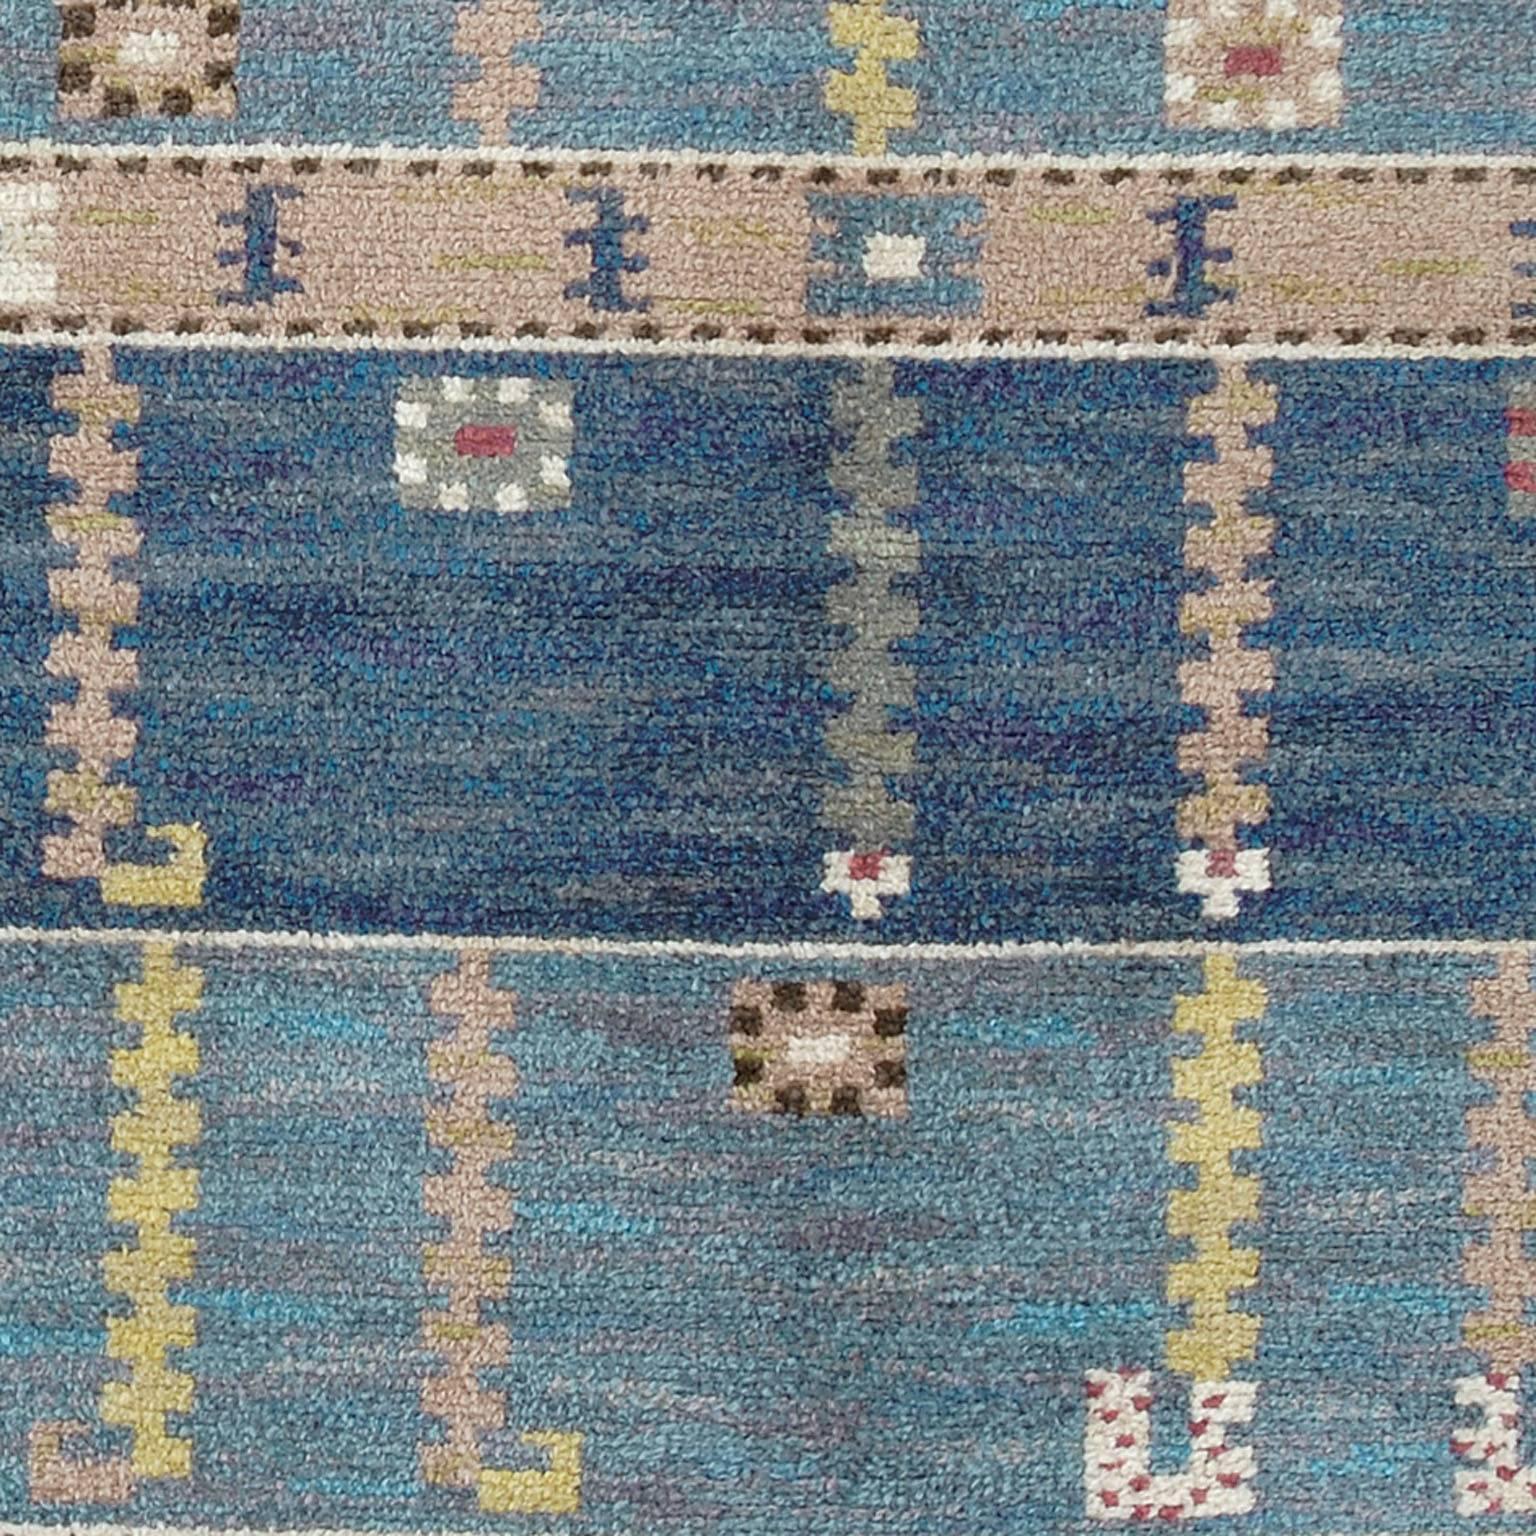 Hand-Woven Mid-20th Century Swedish Pile Carpet For Sale